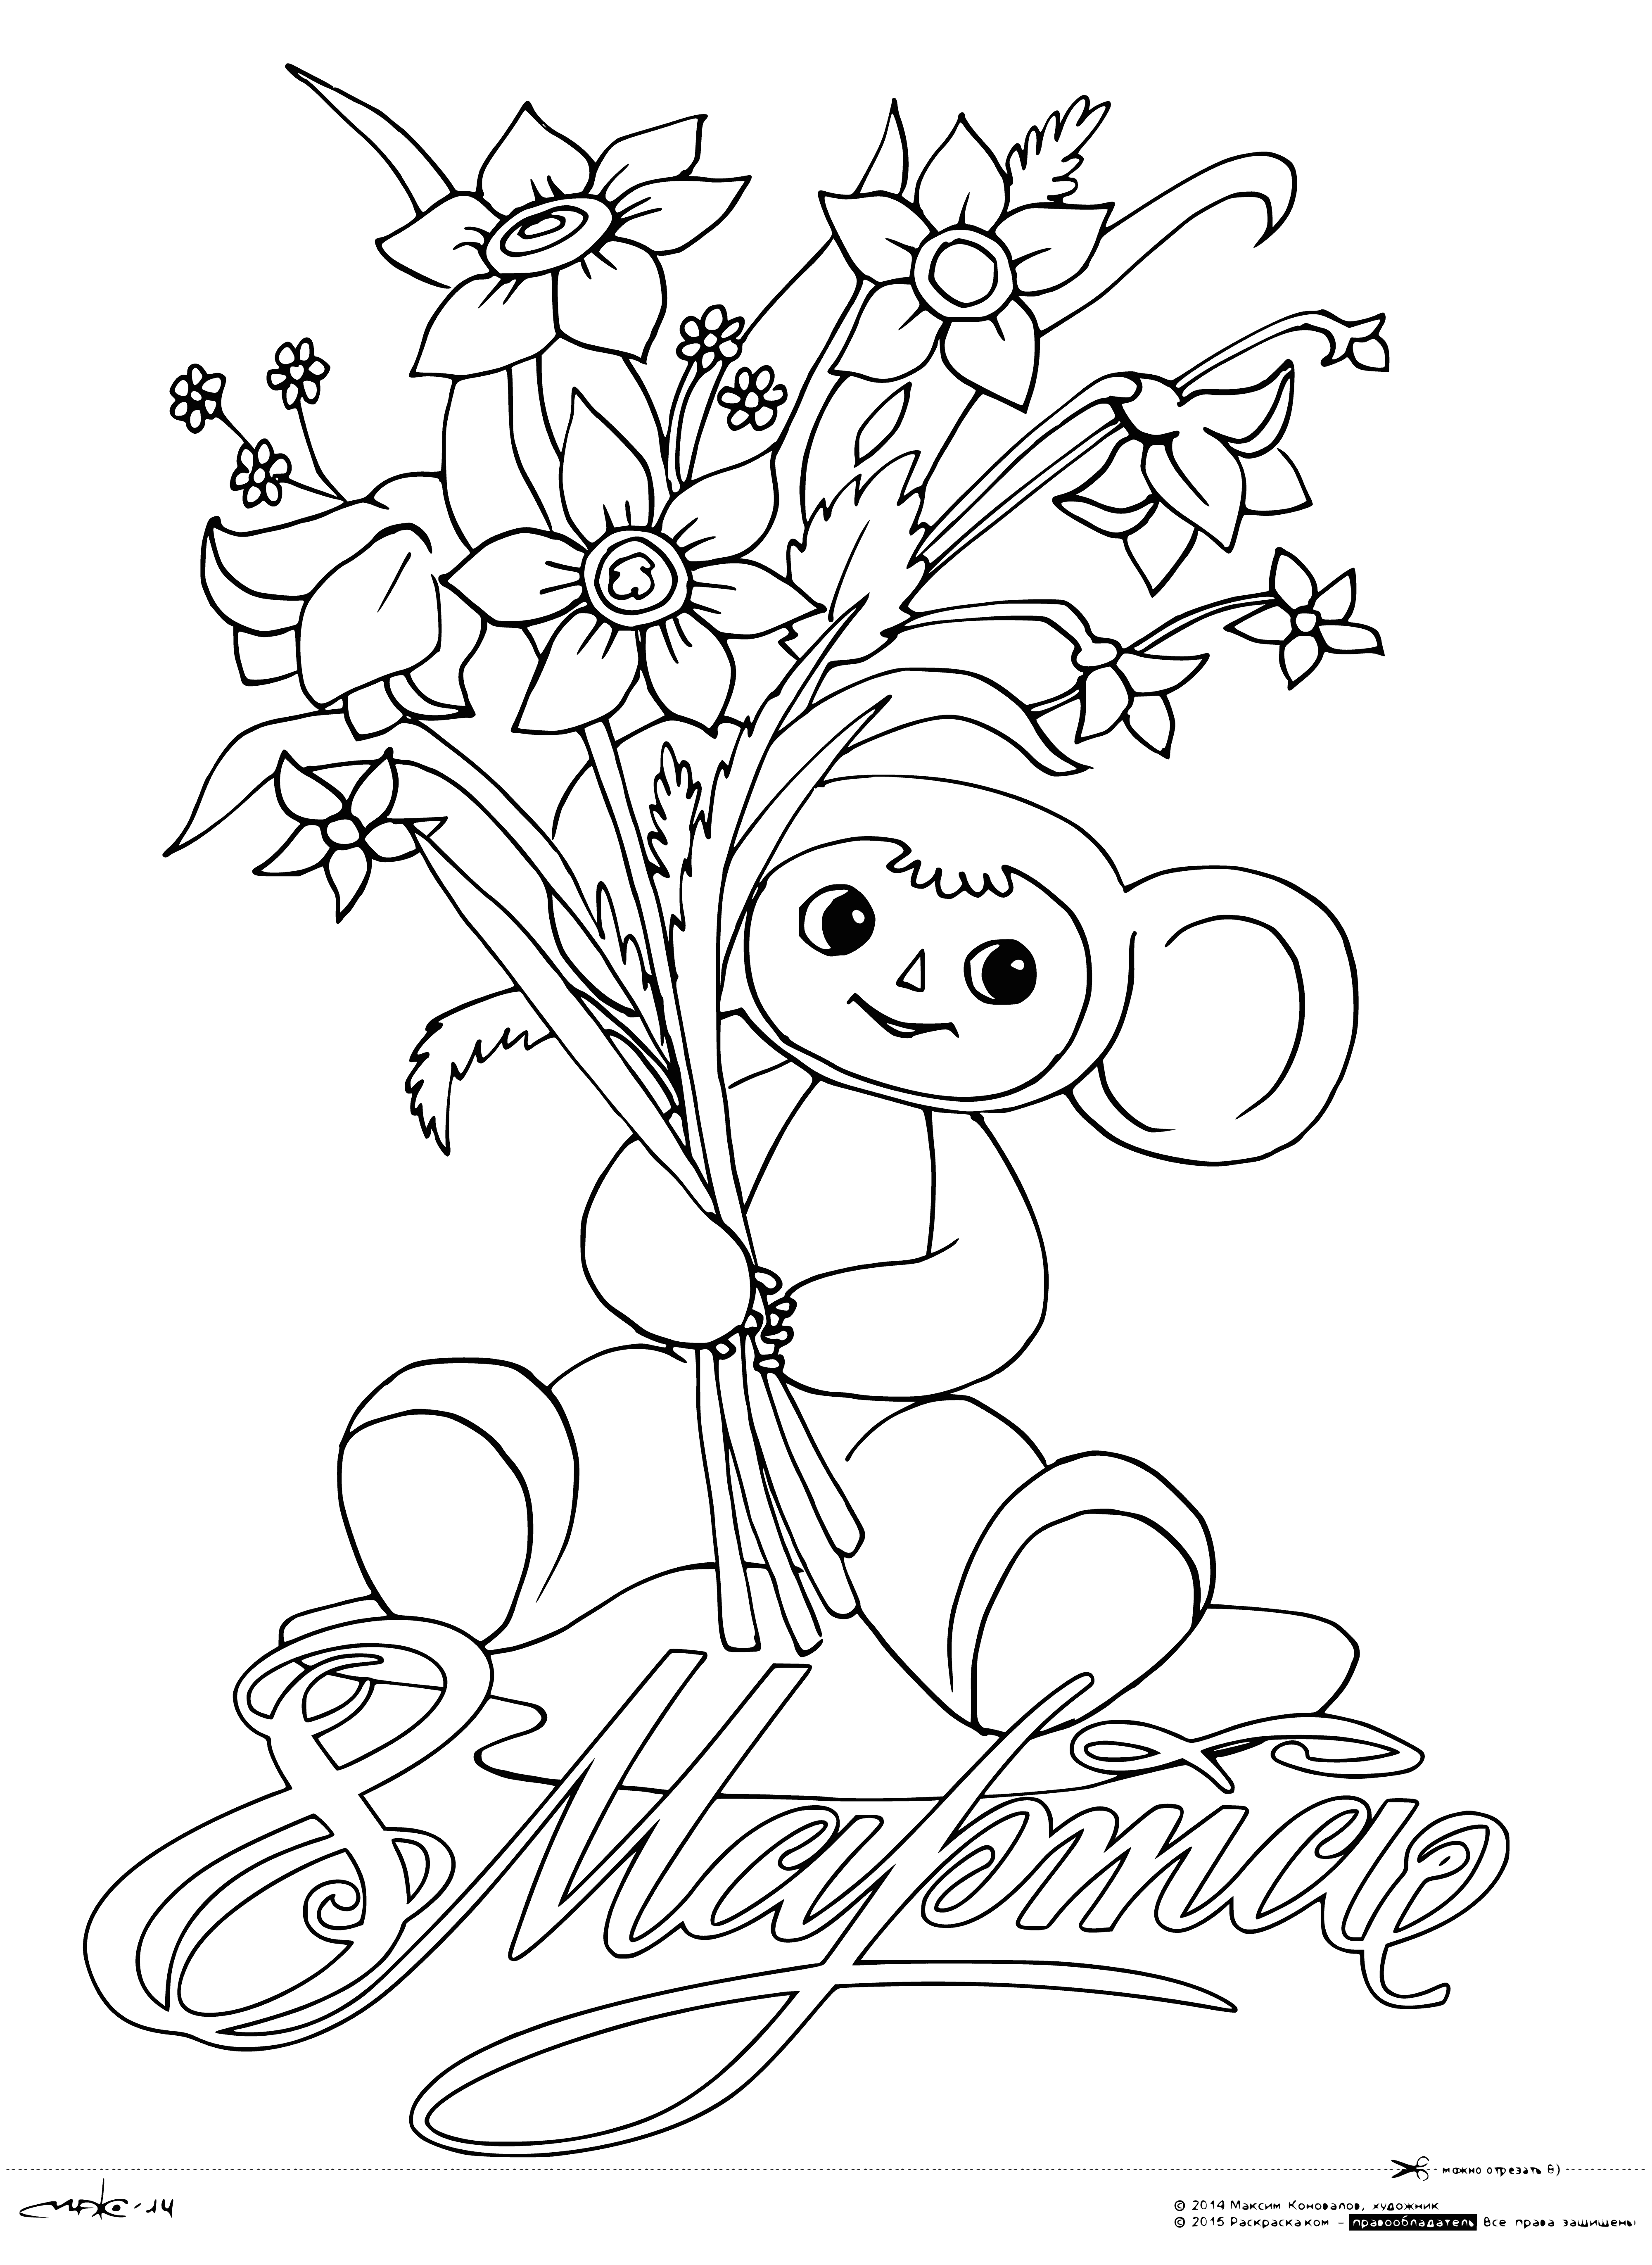 coloring page: Giant blue Cheburashka brings bouquet to smiling woman in flowered dress - she looks up at him in gratitude.